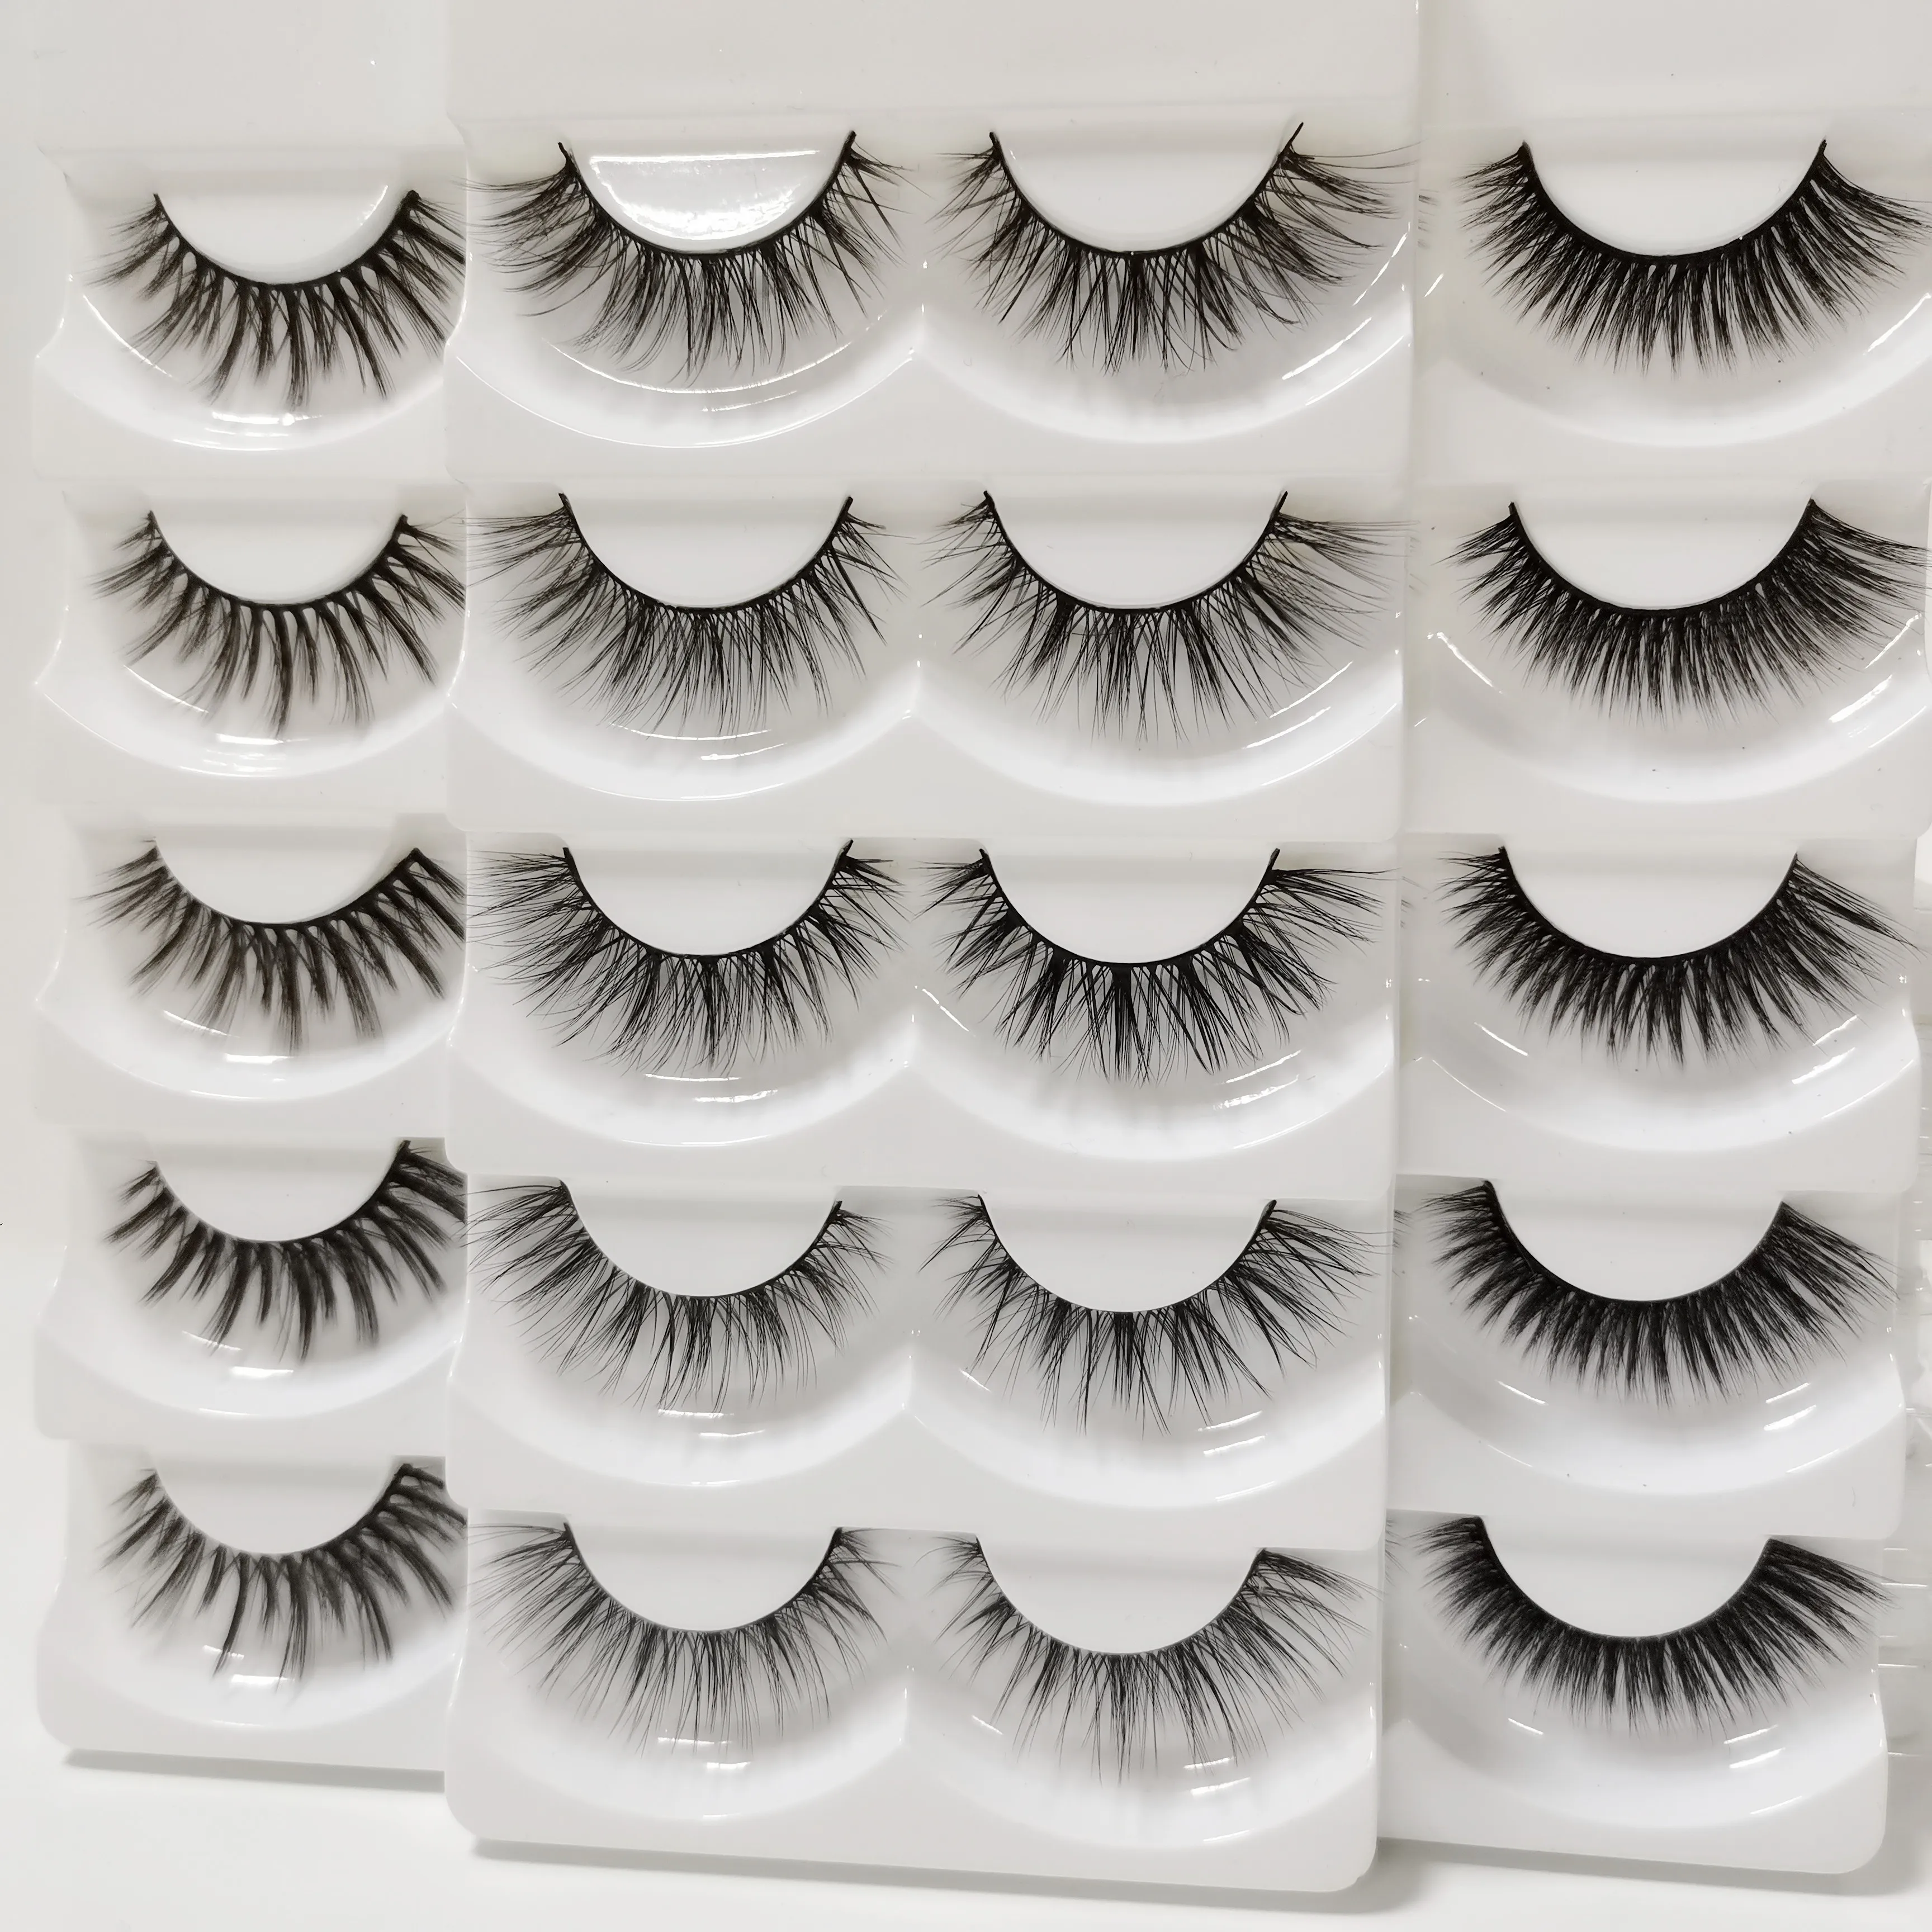 

3D silk faux mink eyelashes create your own brand eyelashes faux mink lash with private label eyelashes